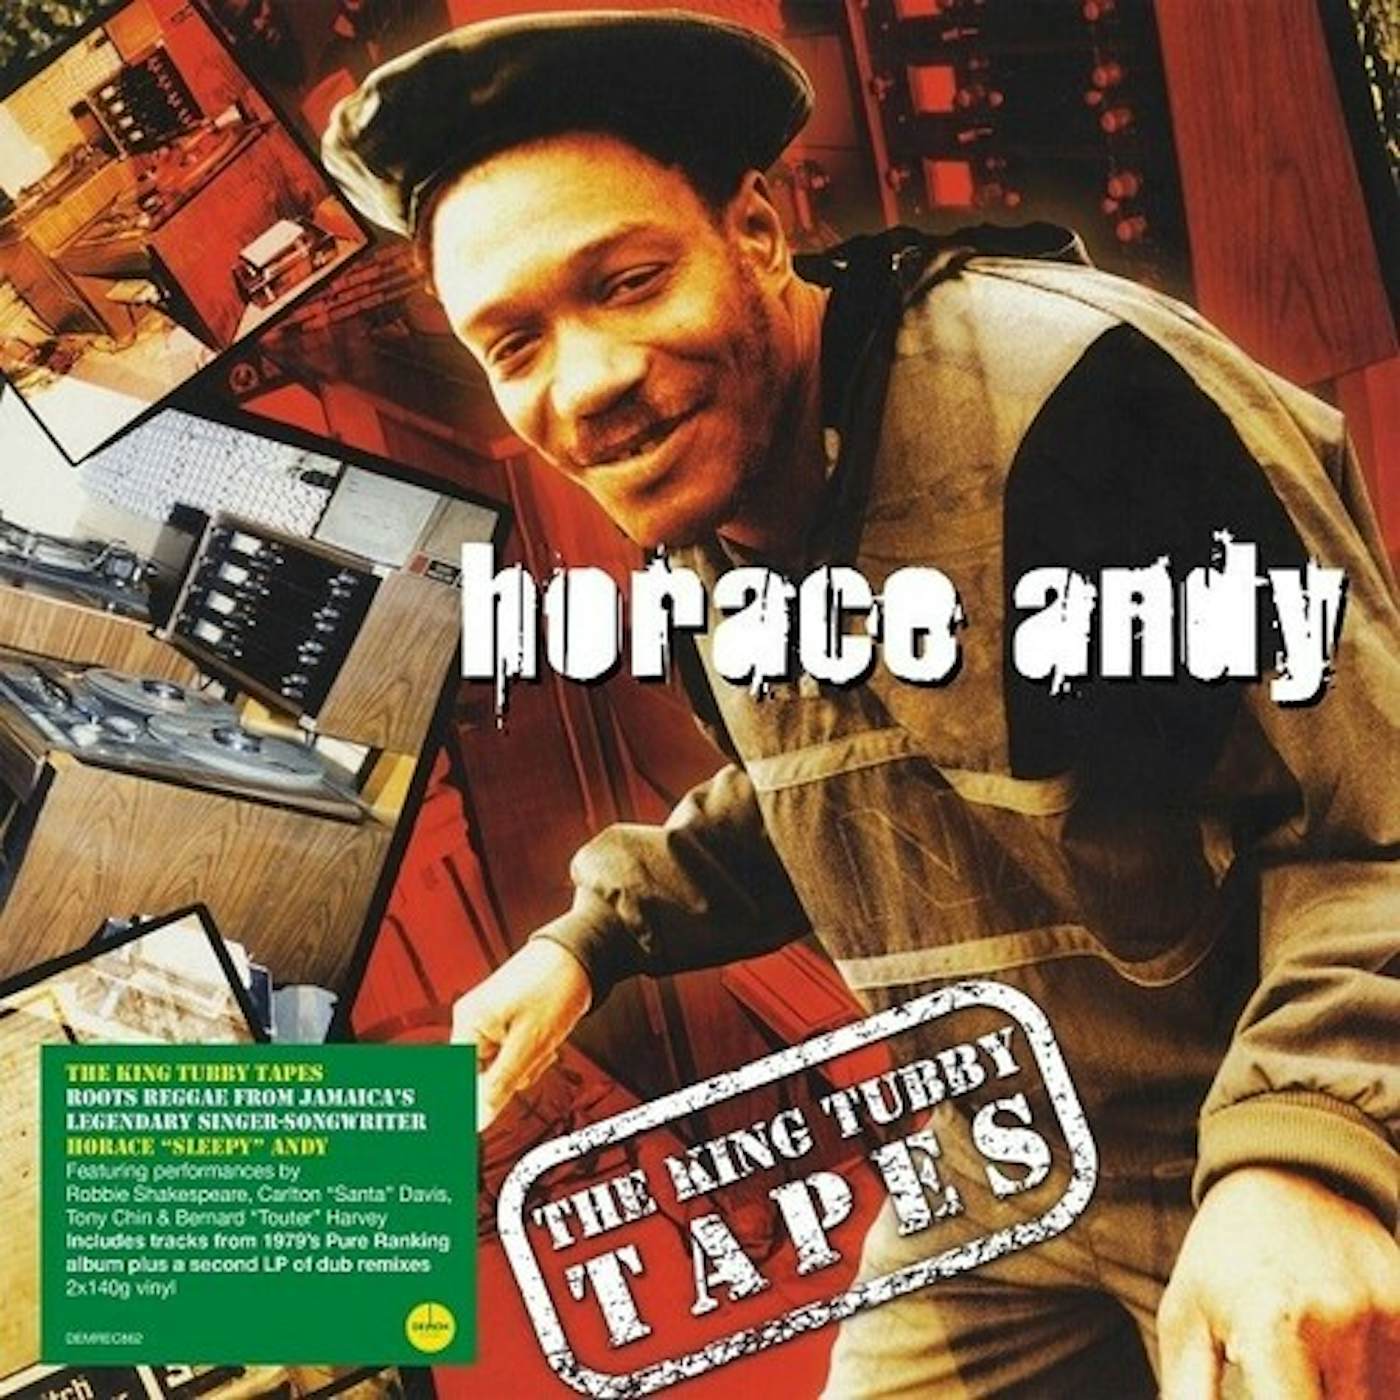 Horace Andy KING TUBBY TAPES Vinyl Record